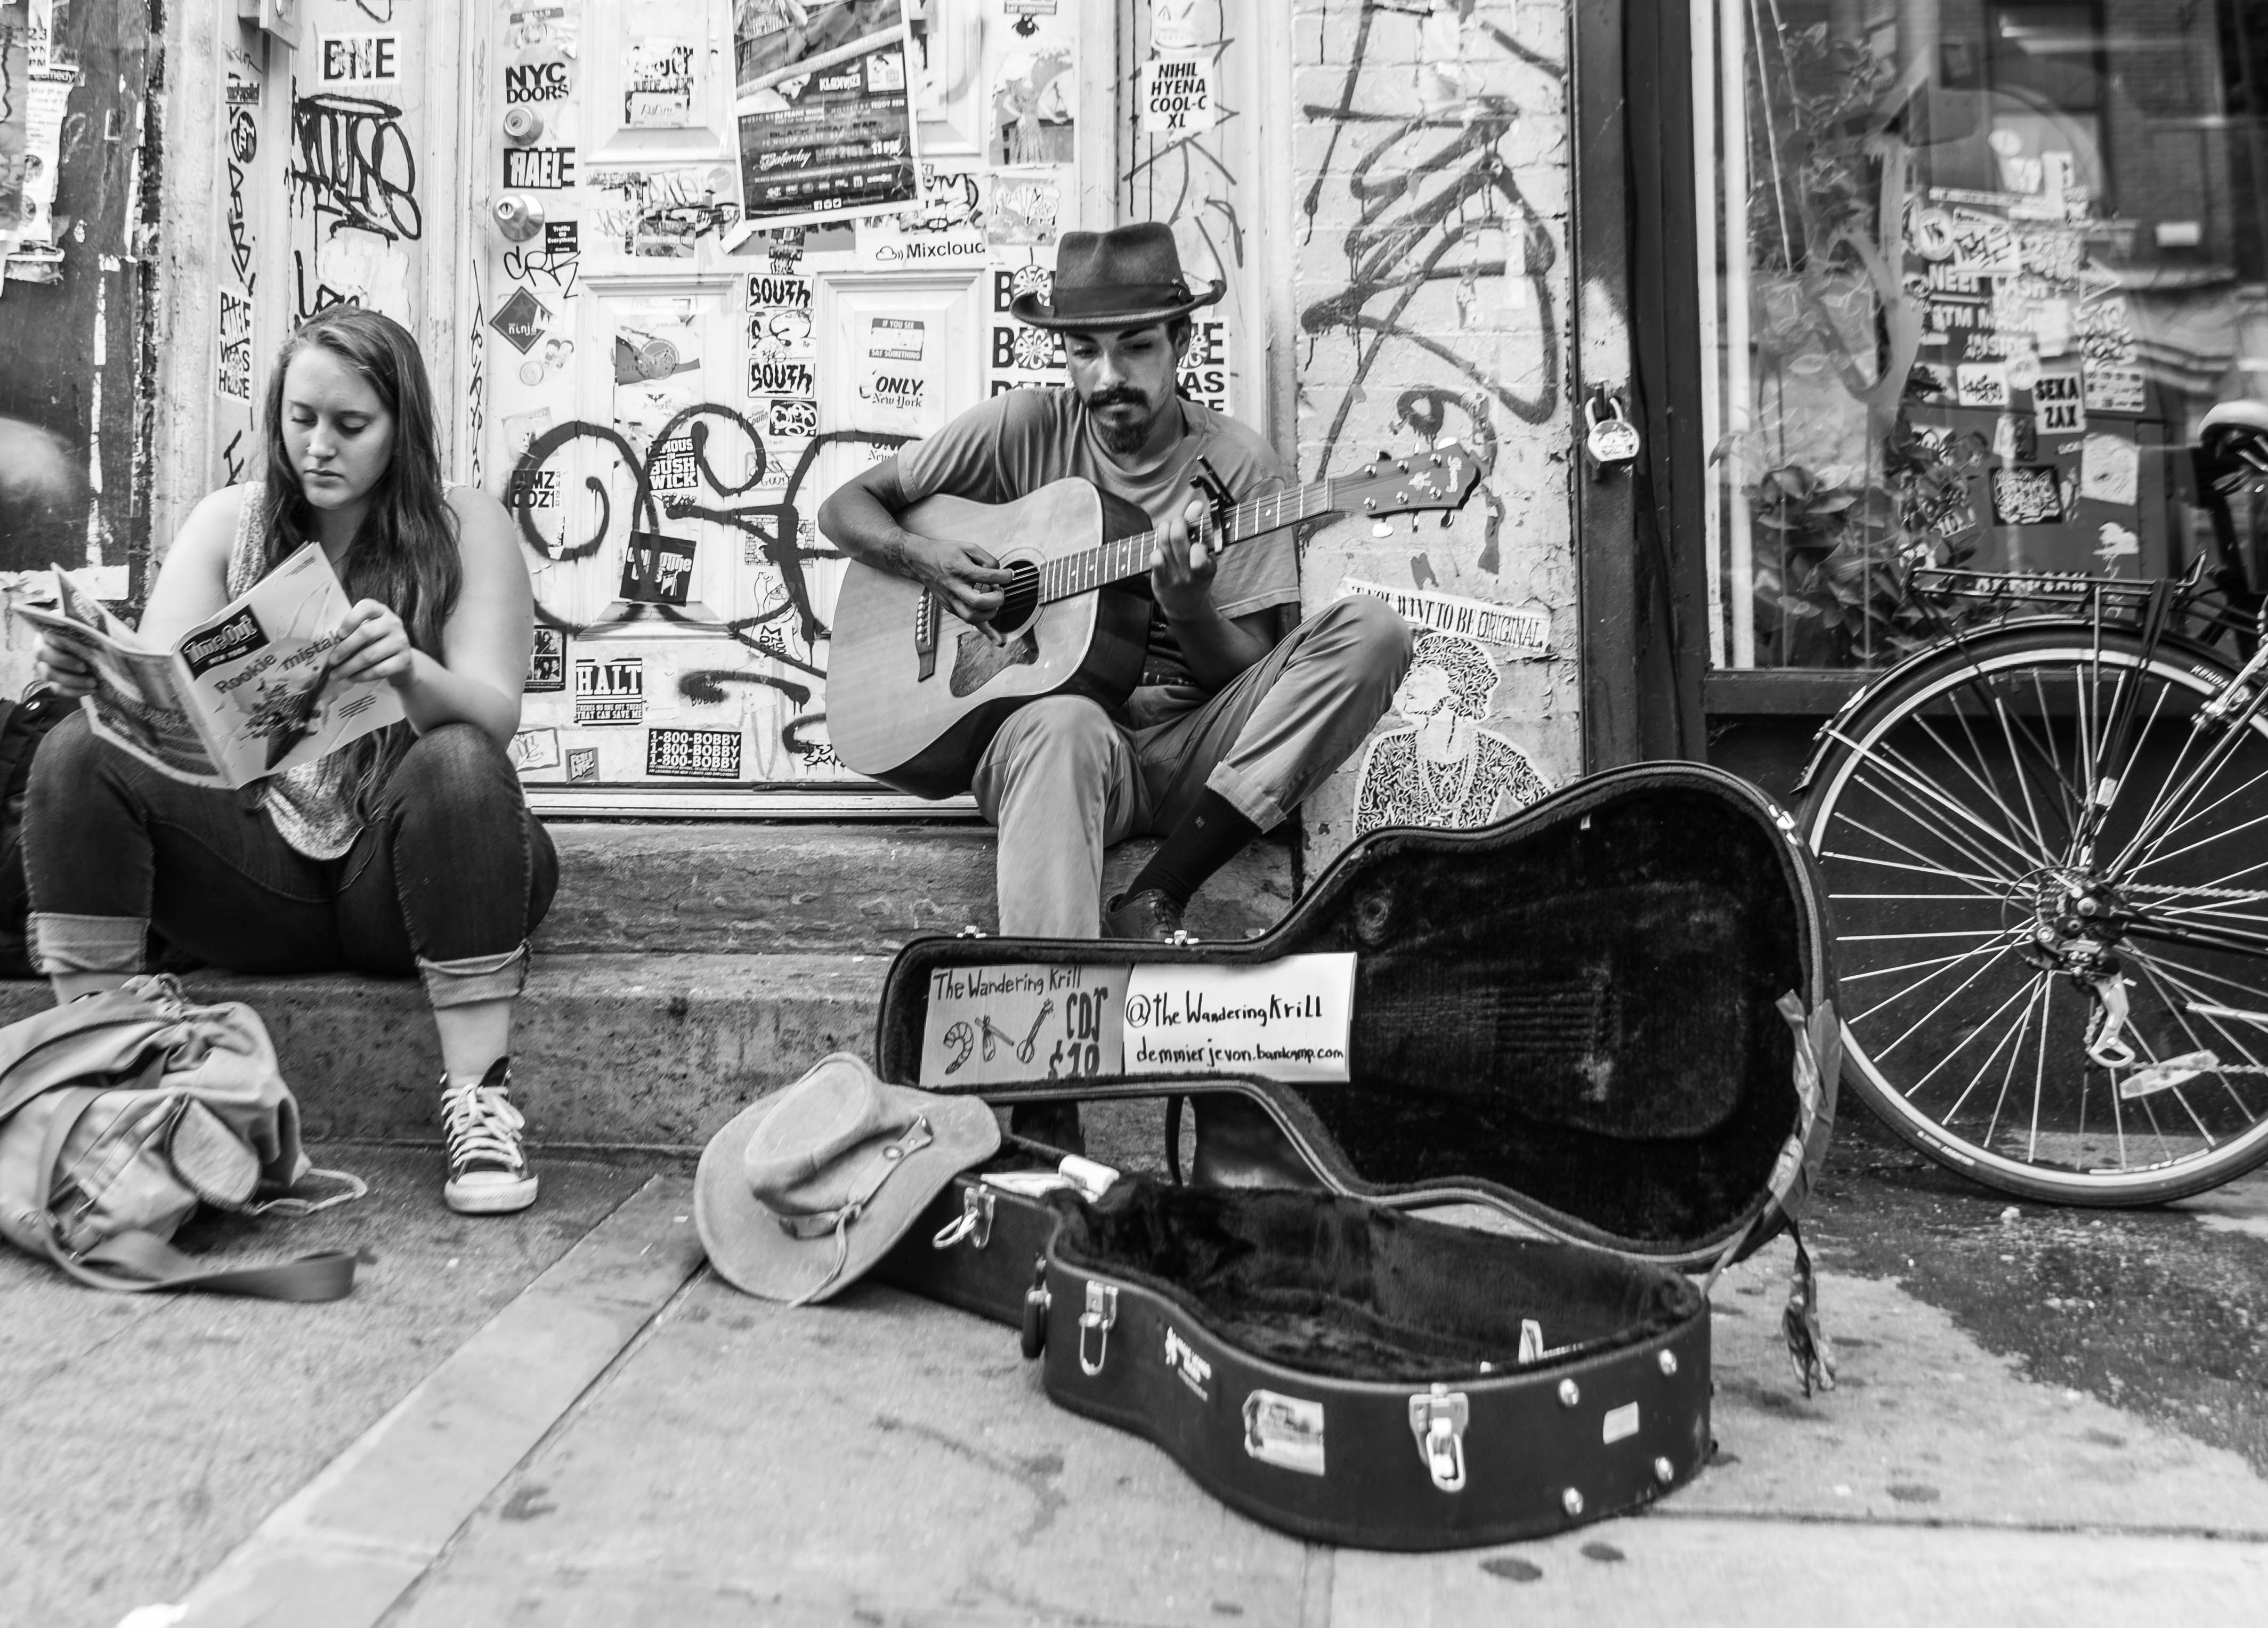 Street Musician by the Subway in Greenwich Village